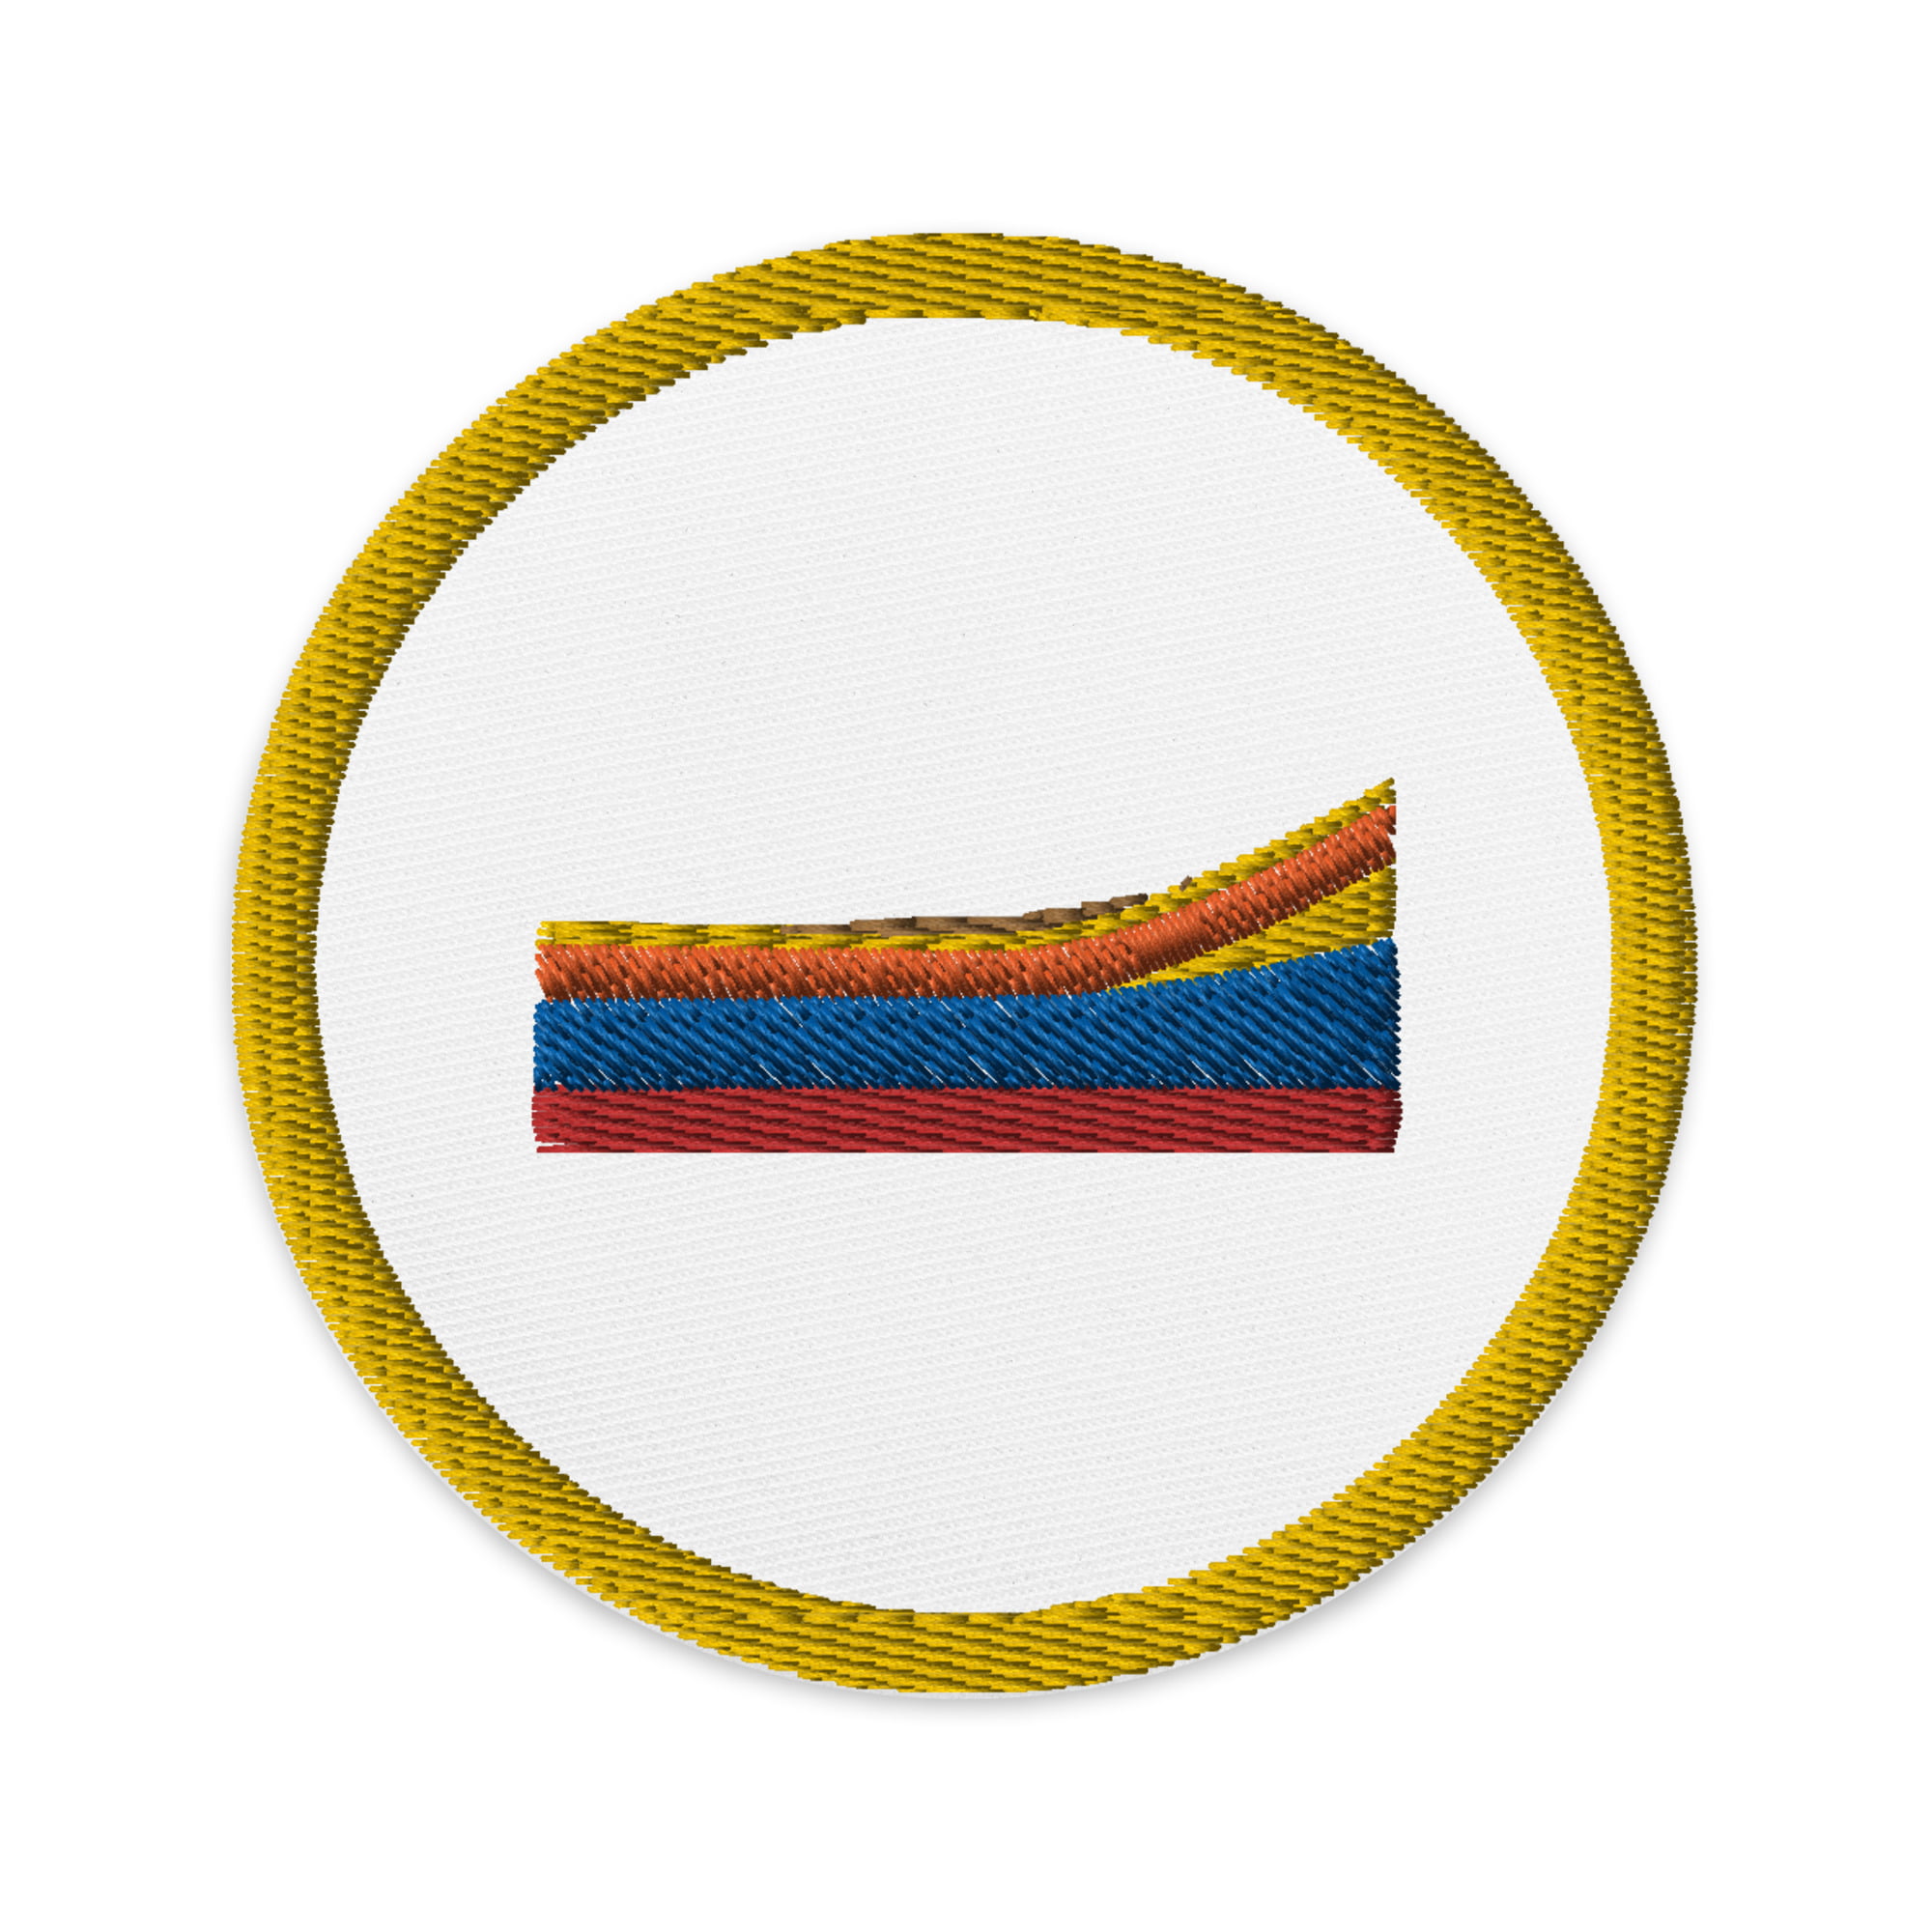 embroidered patches white circular 3 in front 63d027826d89f